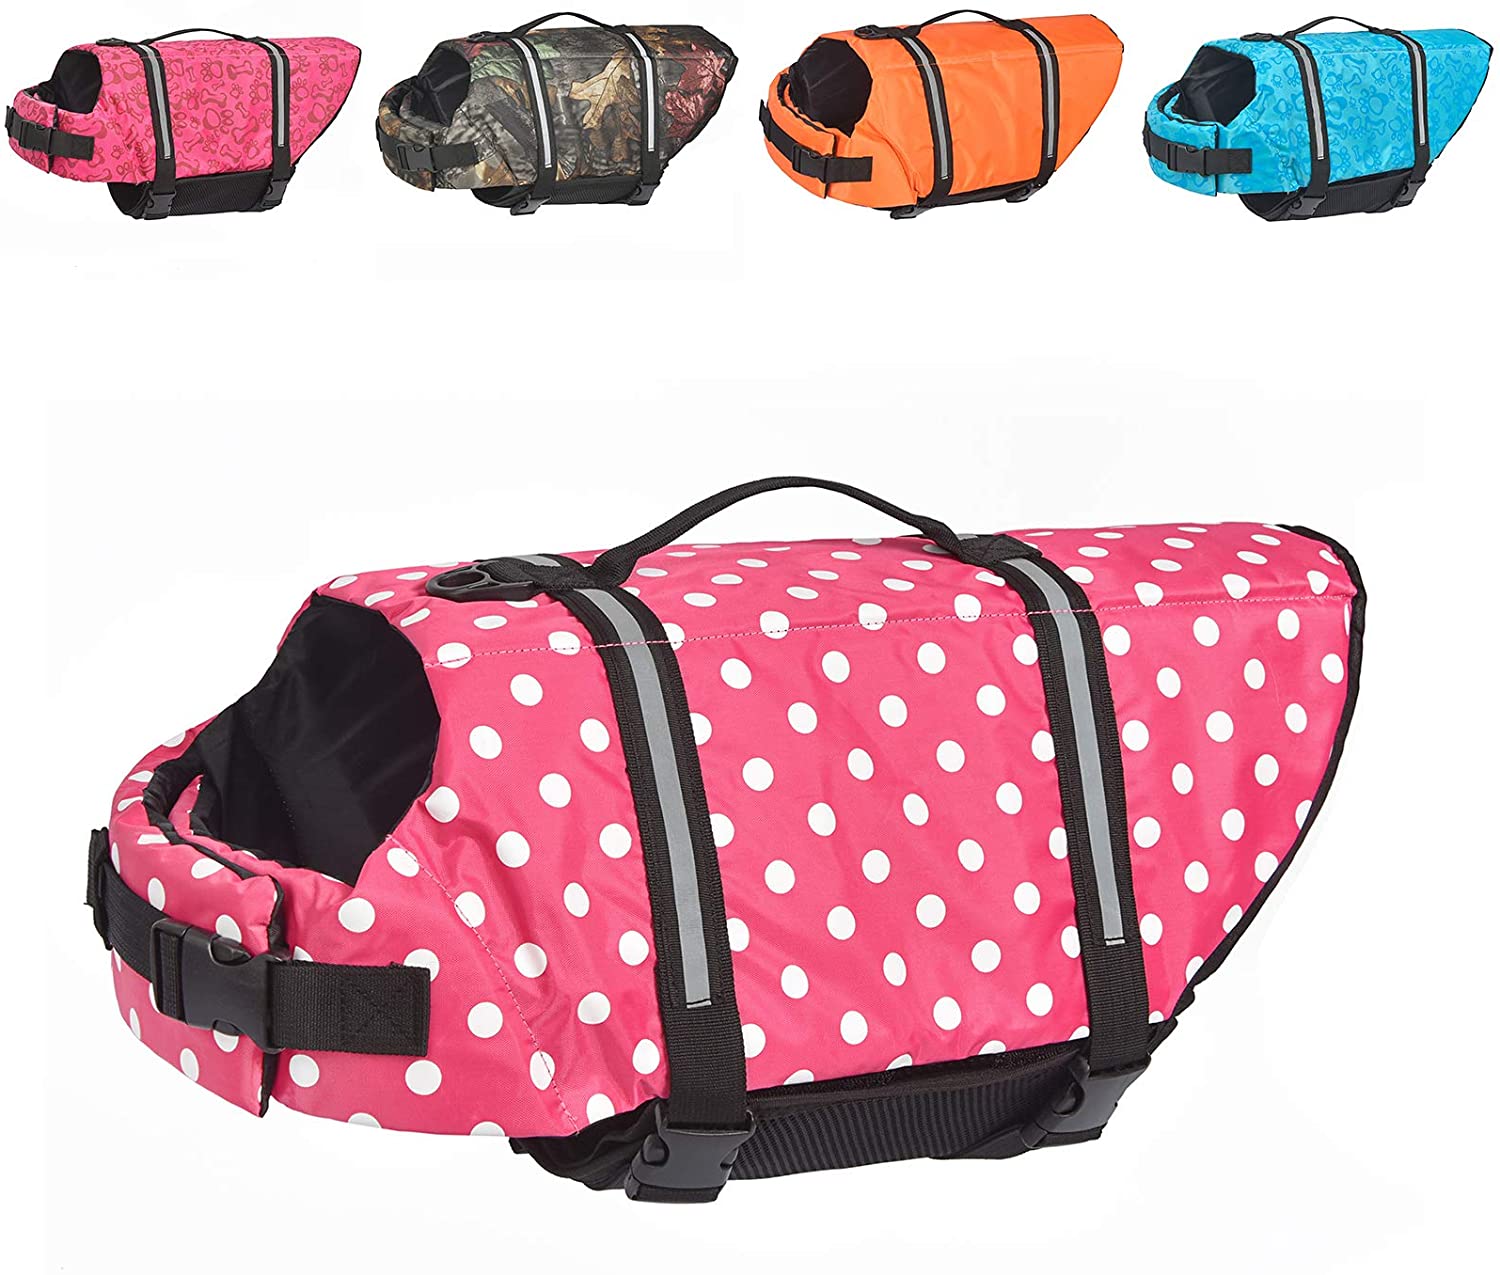 Eliminate Anxiety/Tension Enhanced Buoyancy Dog Lifesaver with Rescue Handle for Small Medium or Larger Dogs Adjustable Ripstop Pet Safety Vest Swimming,Mermaid-XS Durable Dog Life Jacket 